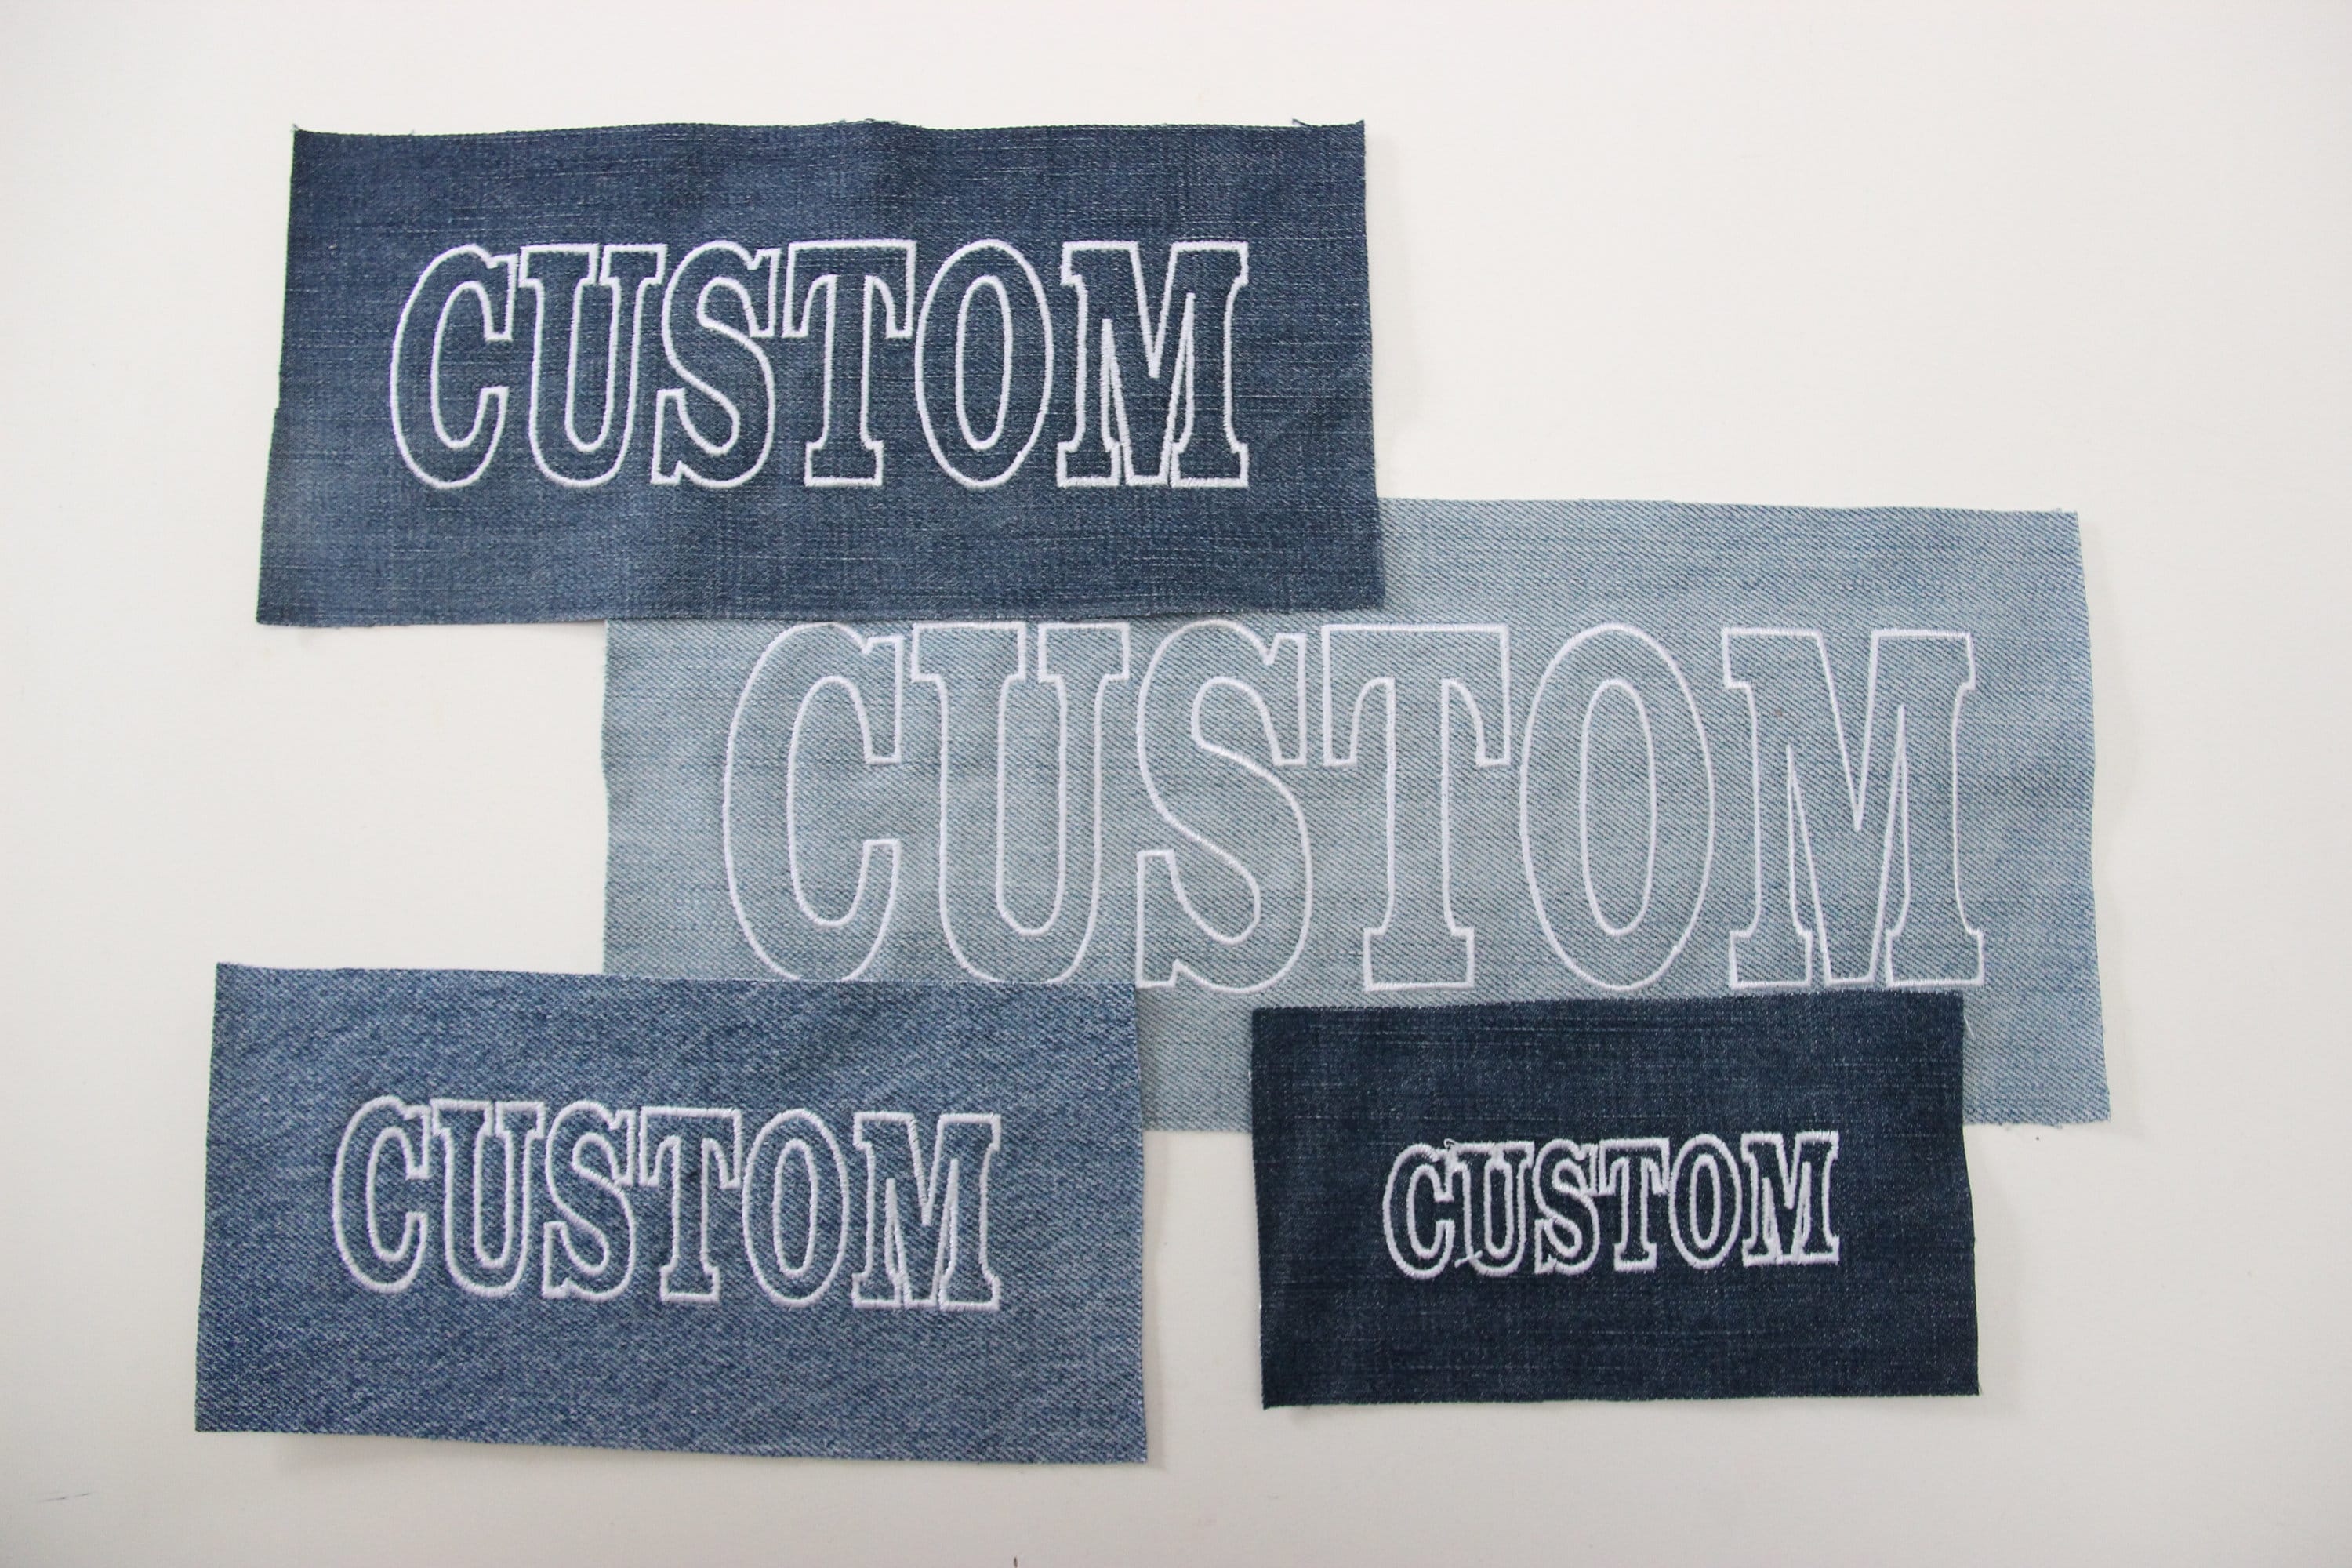 Denim Iron-on Patch, Dark Blue, Light Blue, Jeans, Sewing Supply, Care &  Repair 